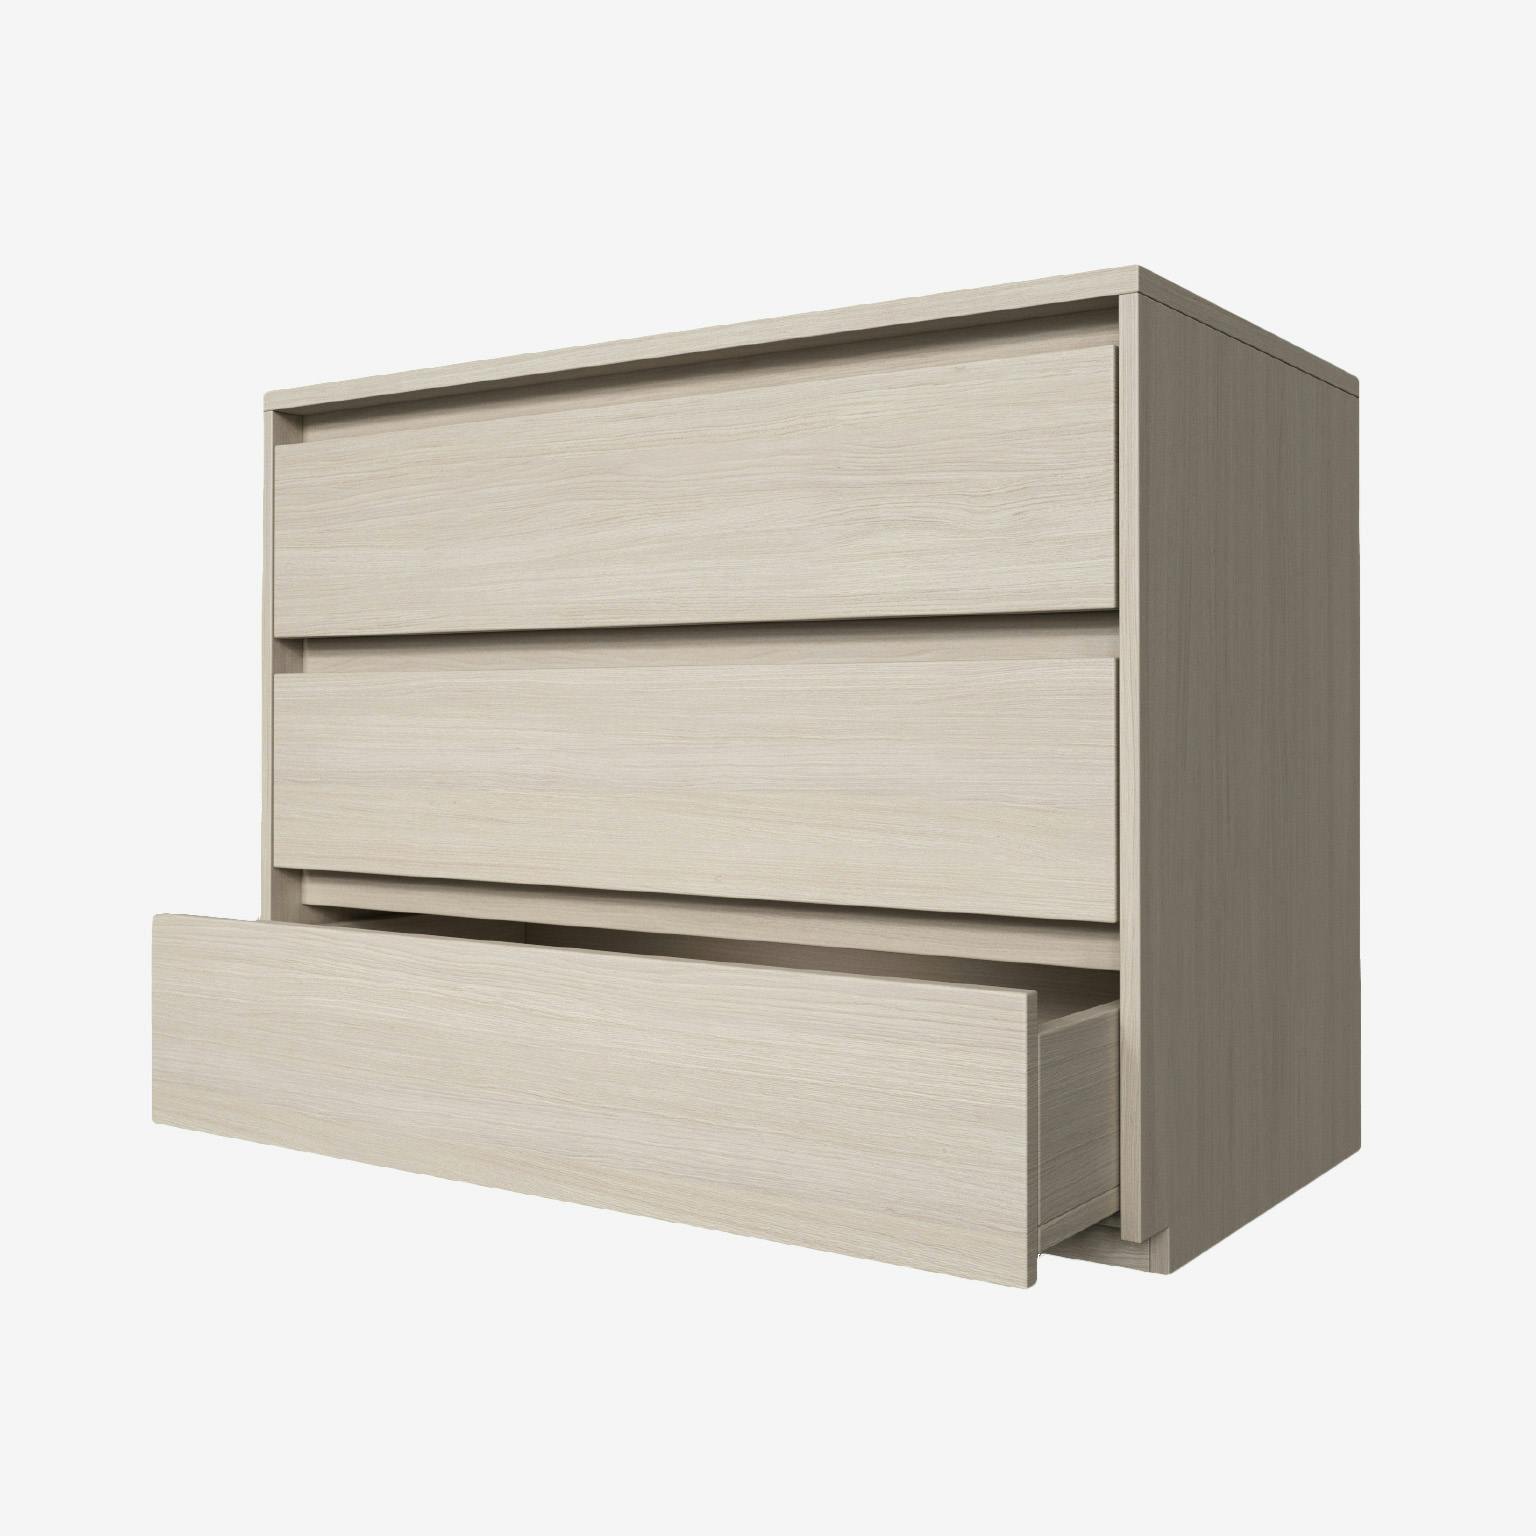 chest-of-drawers-blond-oak-1000-right